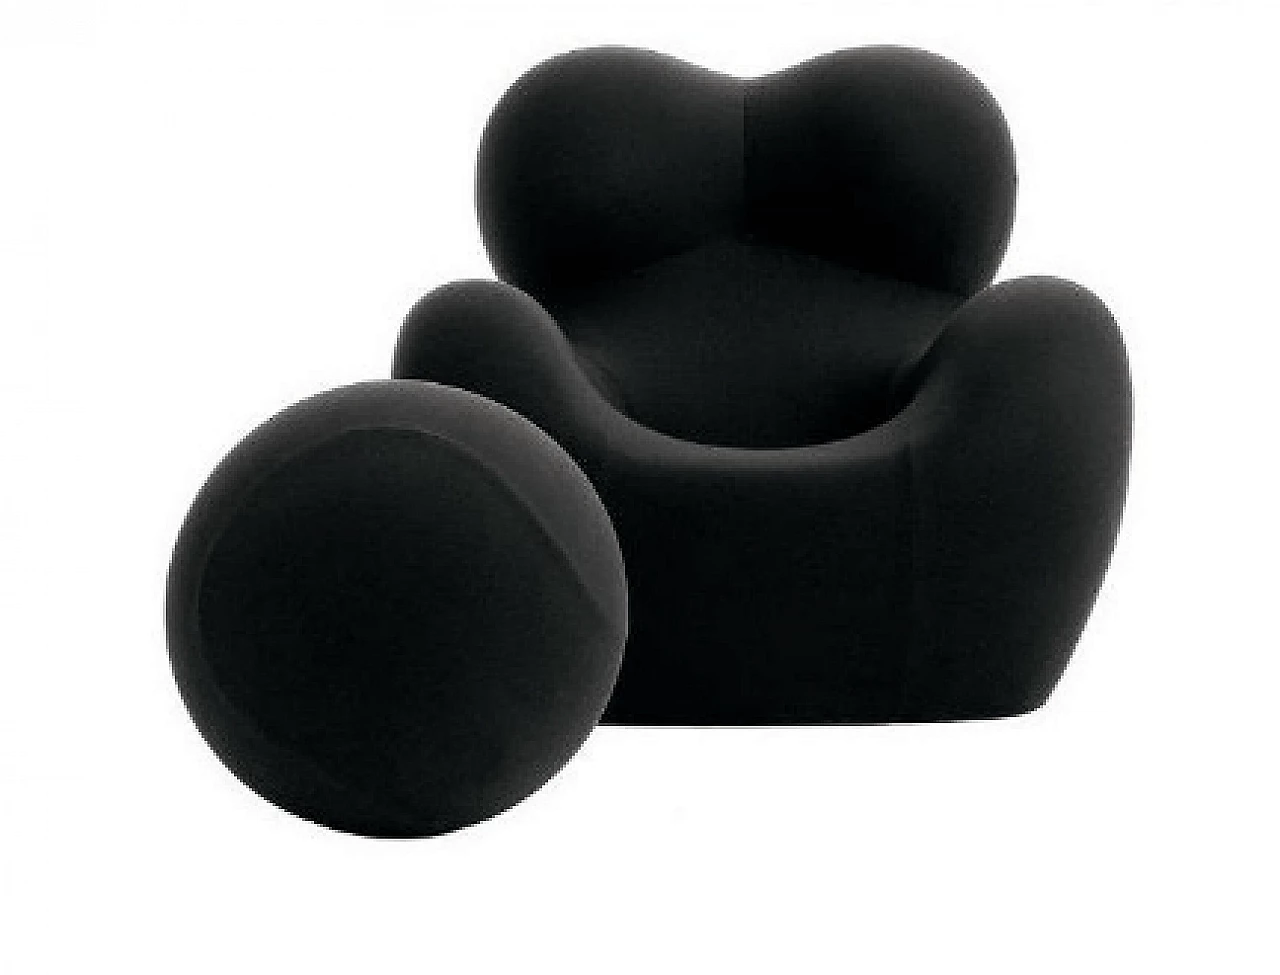 UP 5_6 armchair and pouf by Gaetano Pesce for B&B Italia 5